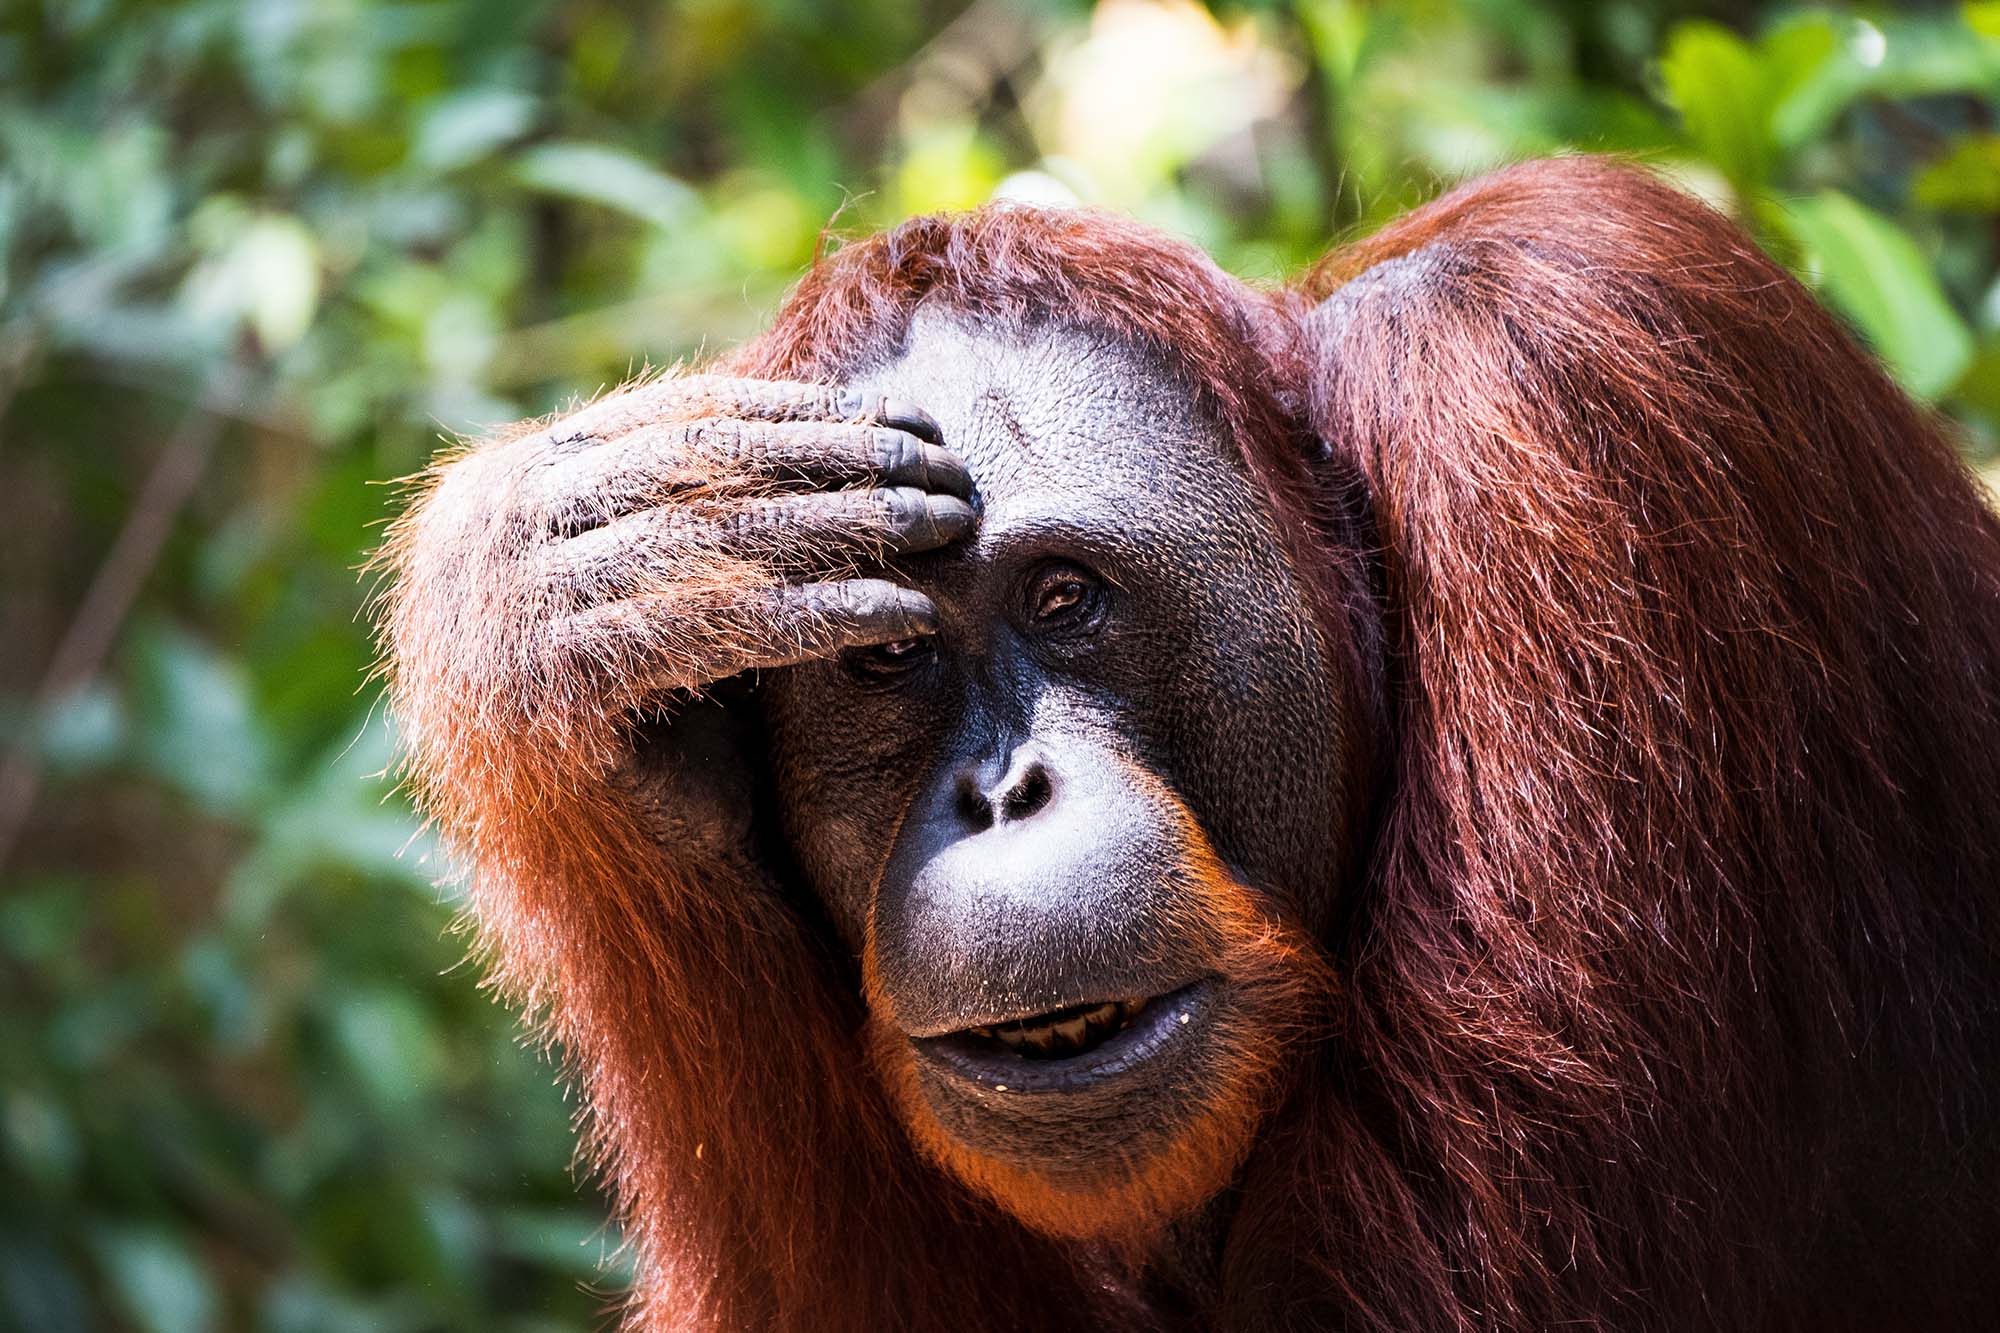 Close-up of an orangutan with its head resting in its hand